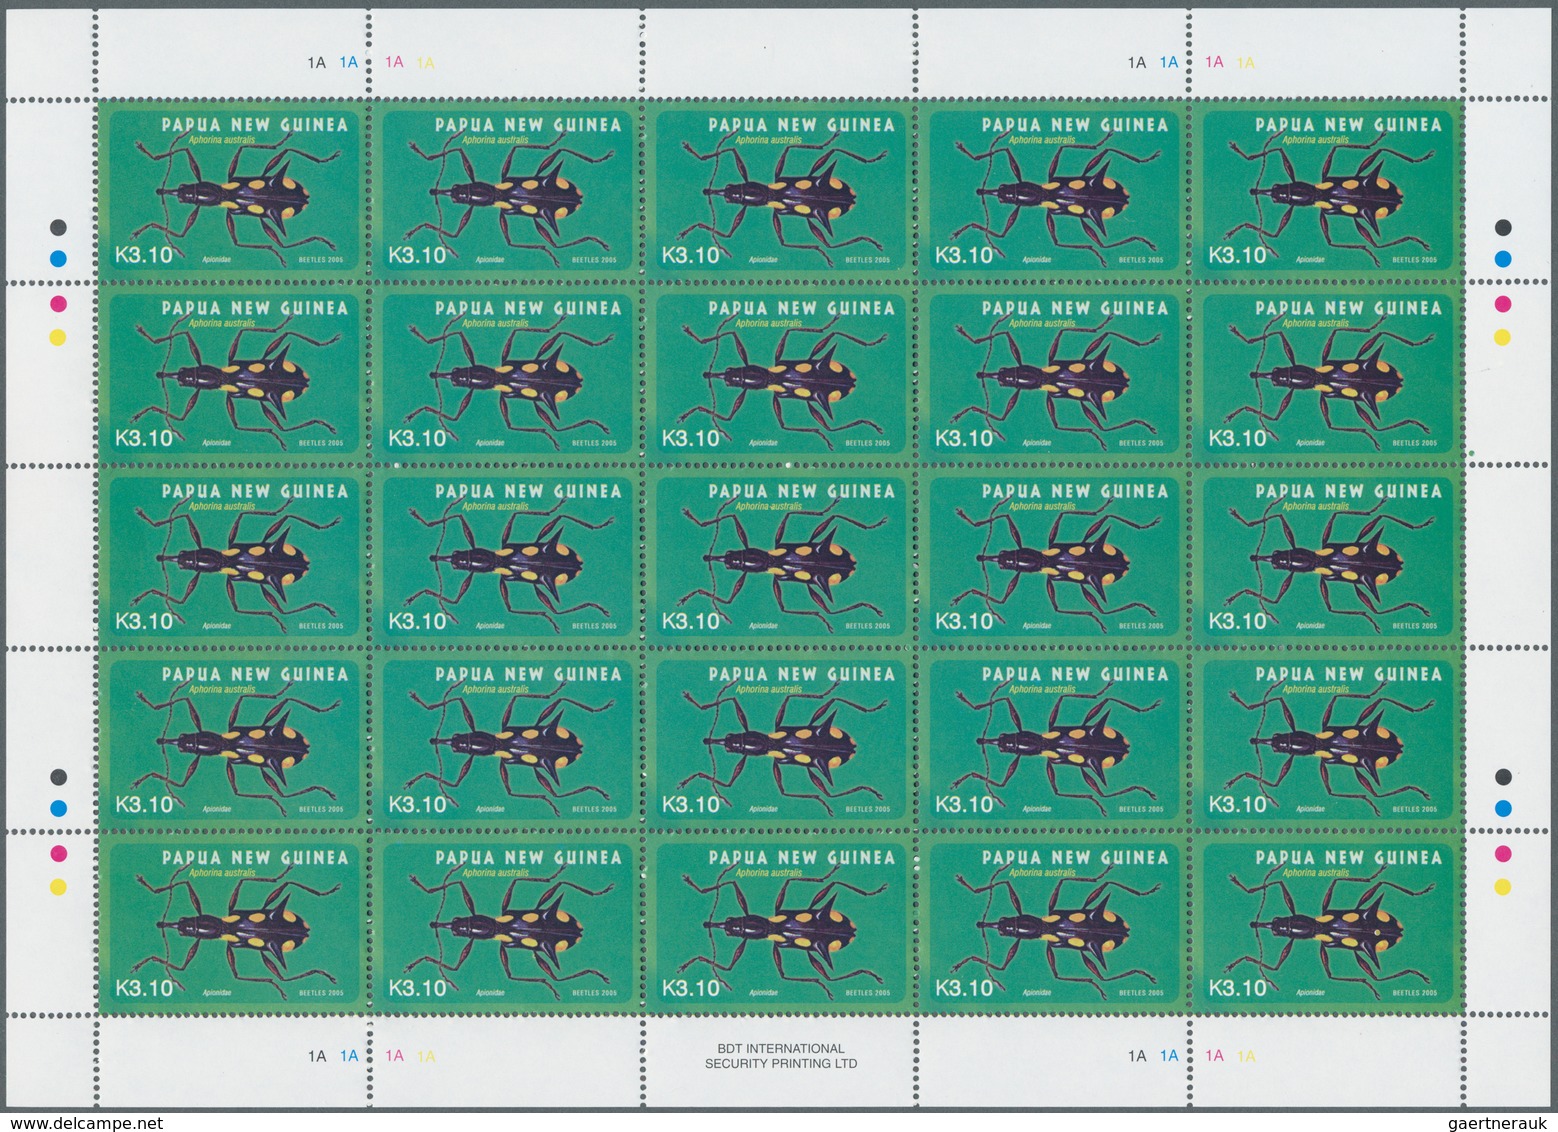 23818 Papua Neuguinea: 1999/2007, marvelous stock of never hinged sheets, many in original packets of 500,